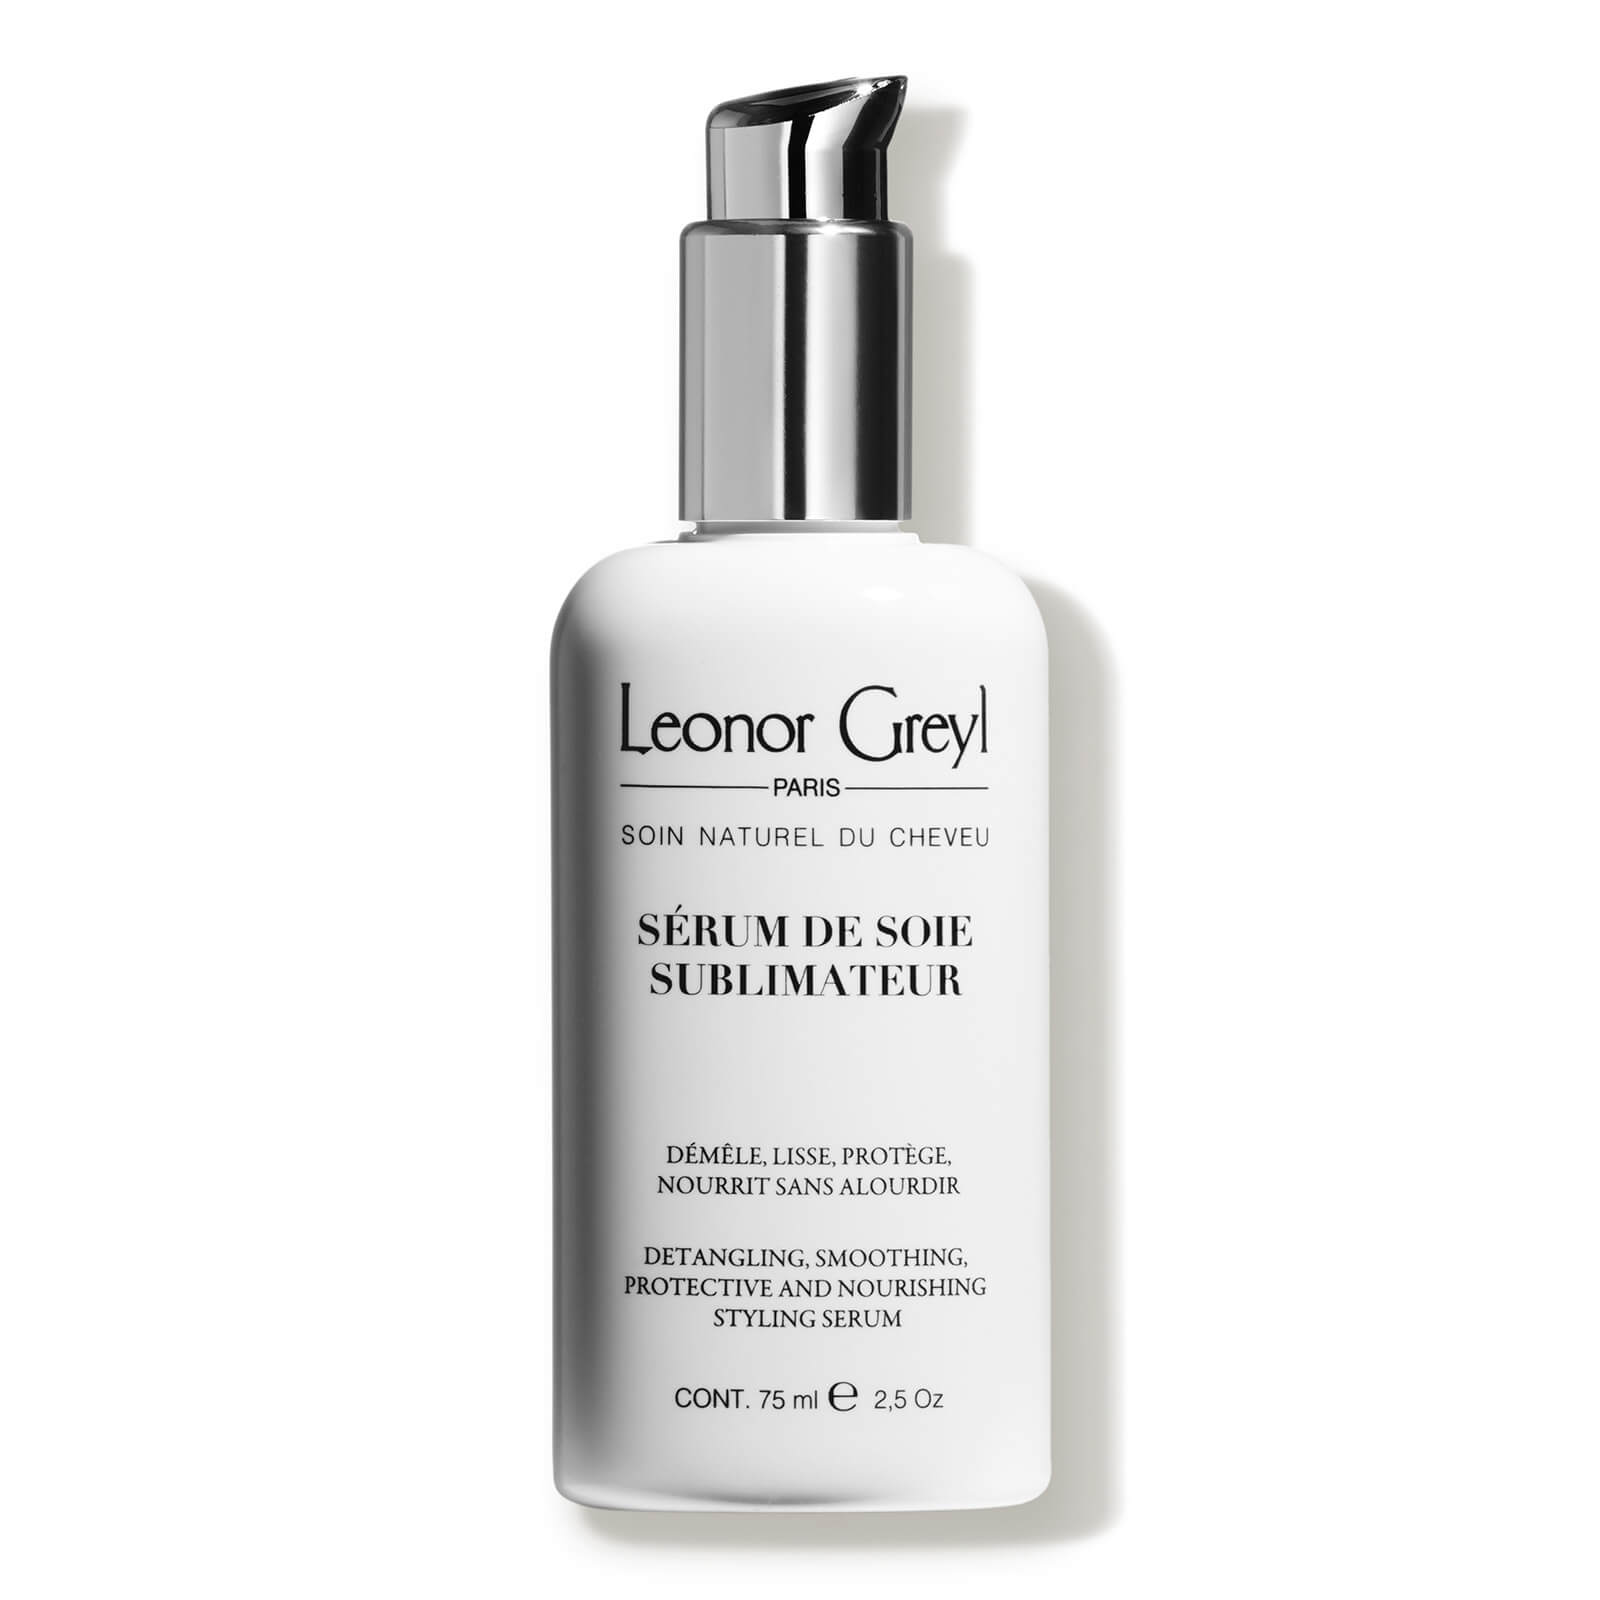 Leonor Greyl Leonor Grayl Serum De Soie Sublimateur (smoothes, Detangles, Protects And Nourishes Without Weighing